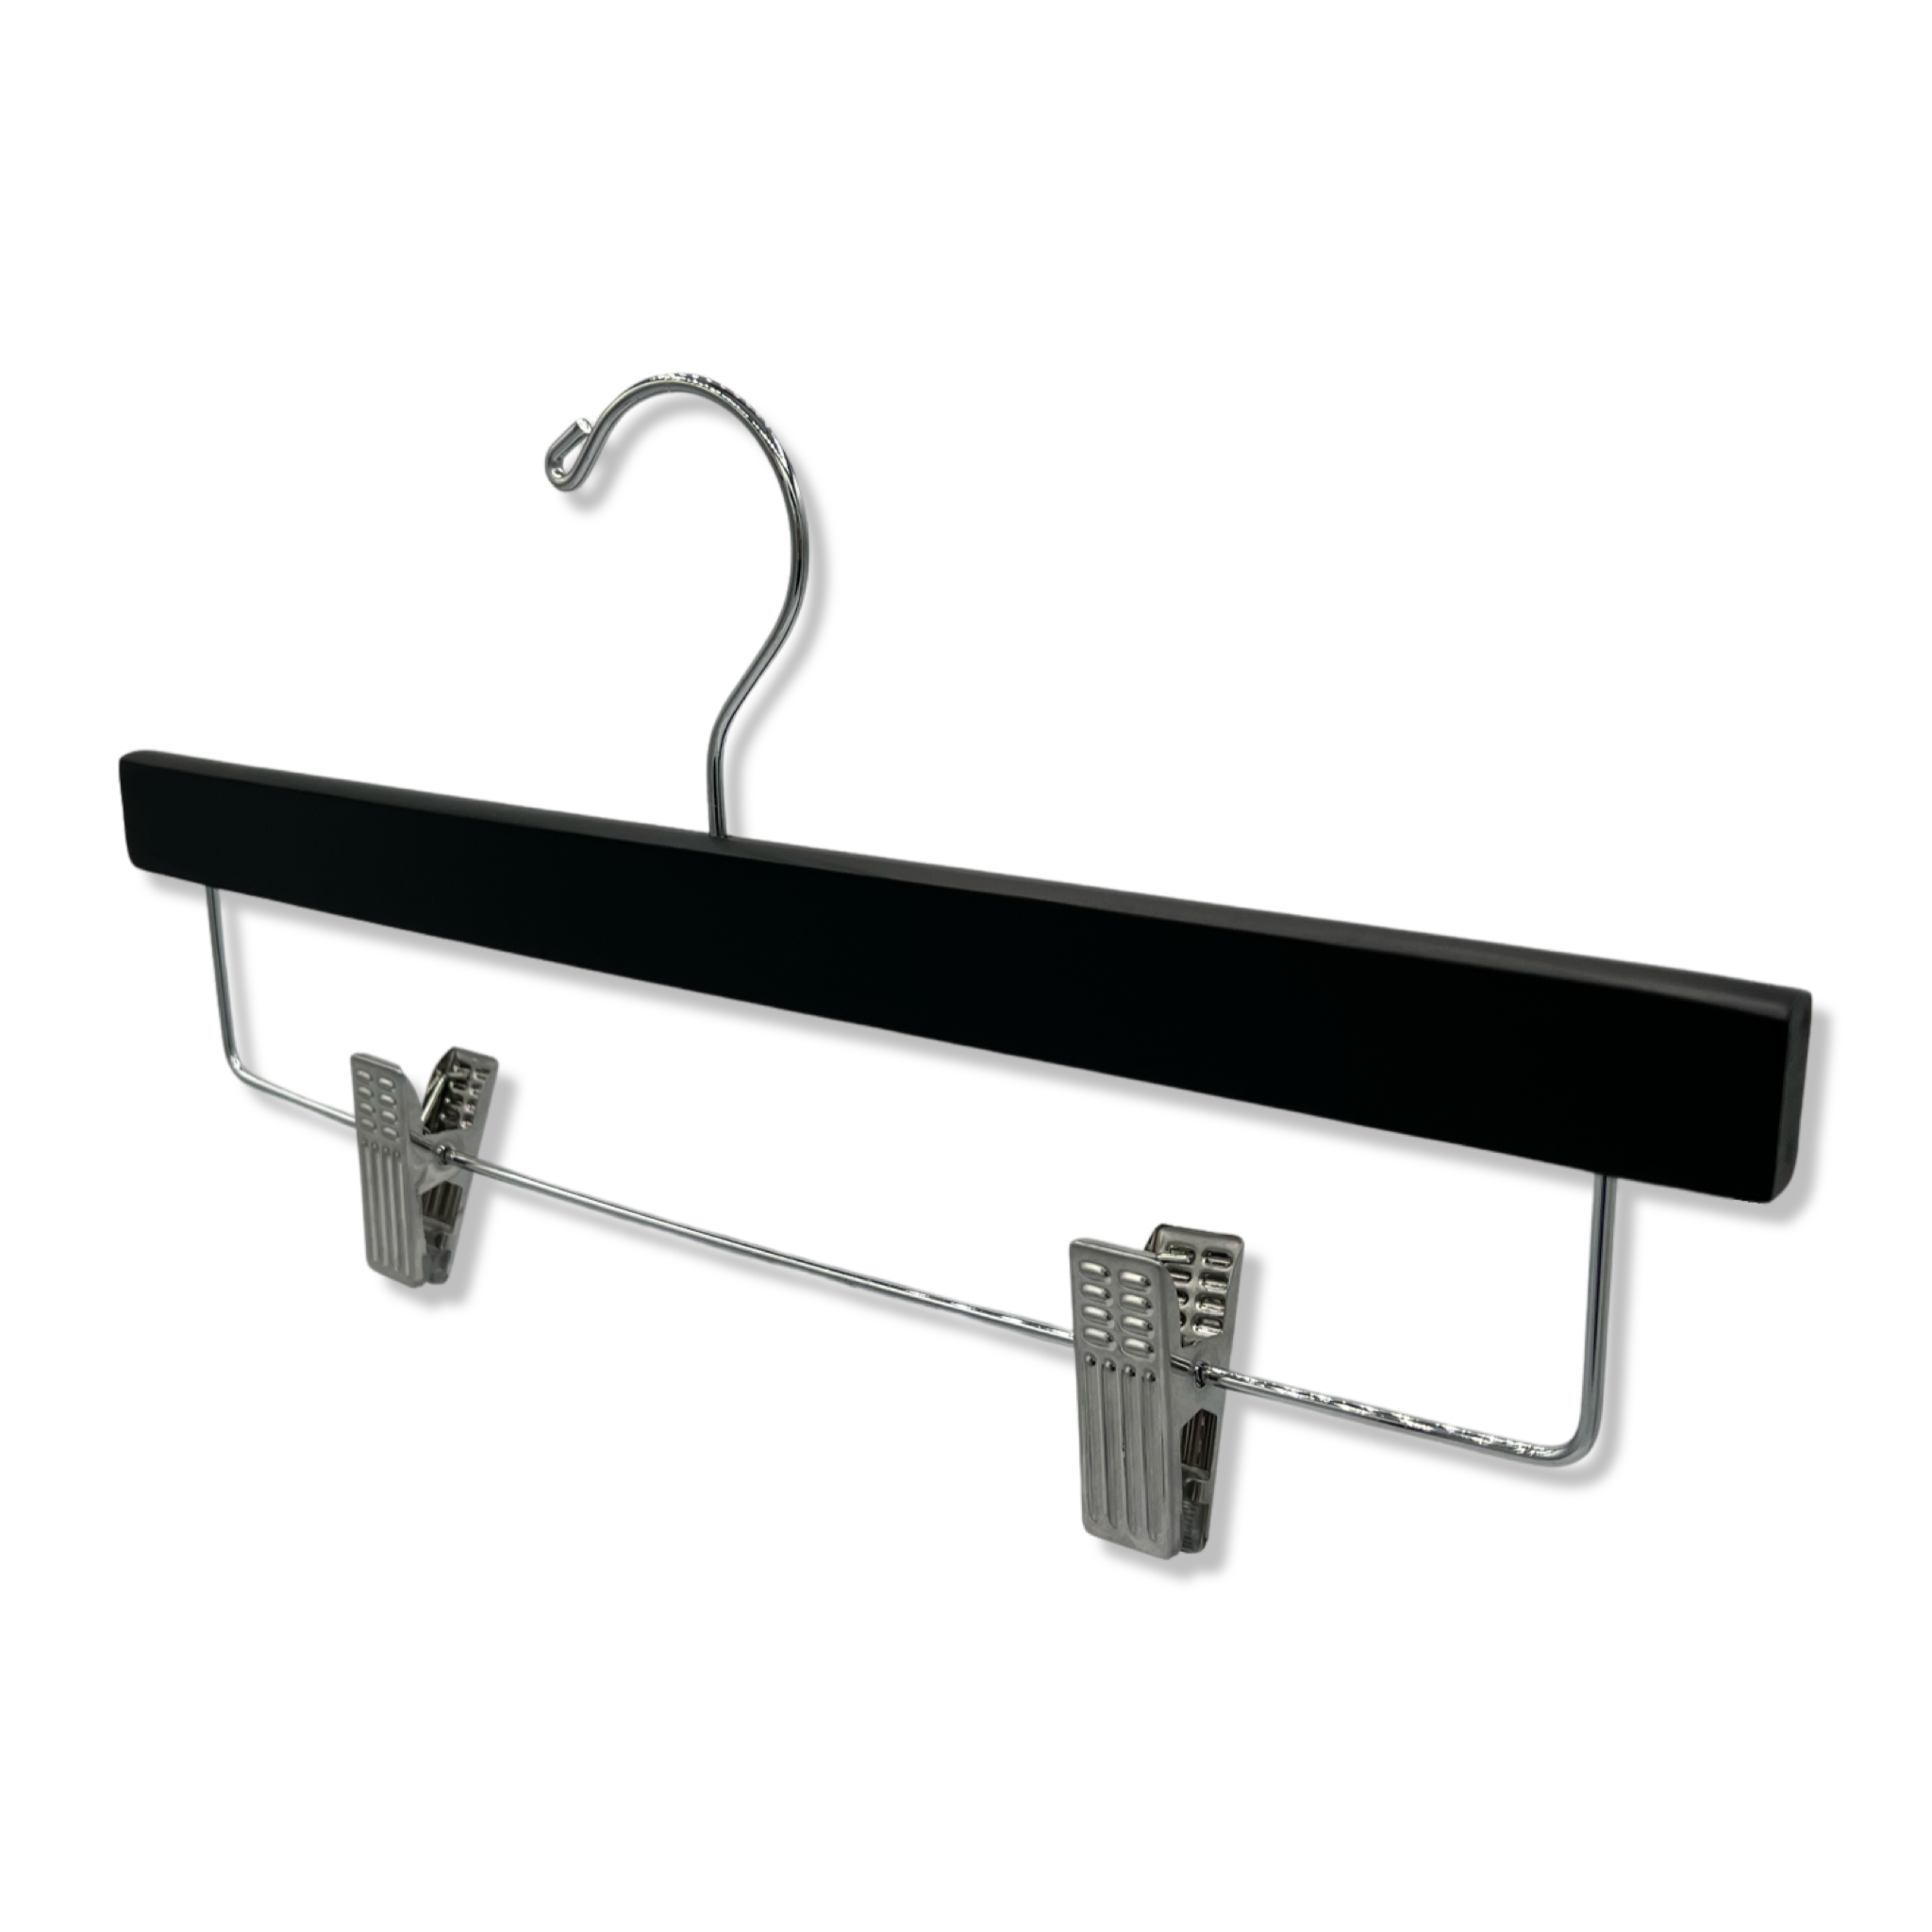 Adult Wood Hangers: Black Wood Skirt/Pant Hanger with Deluxe Chrome Hardware